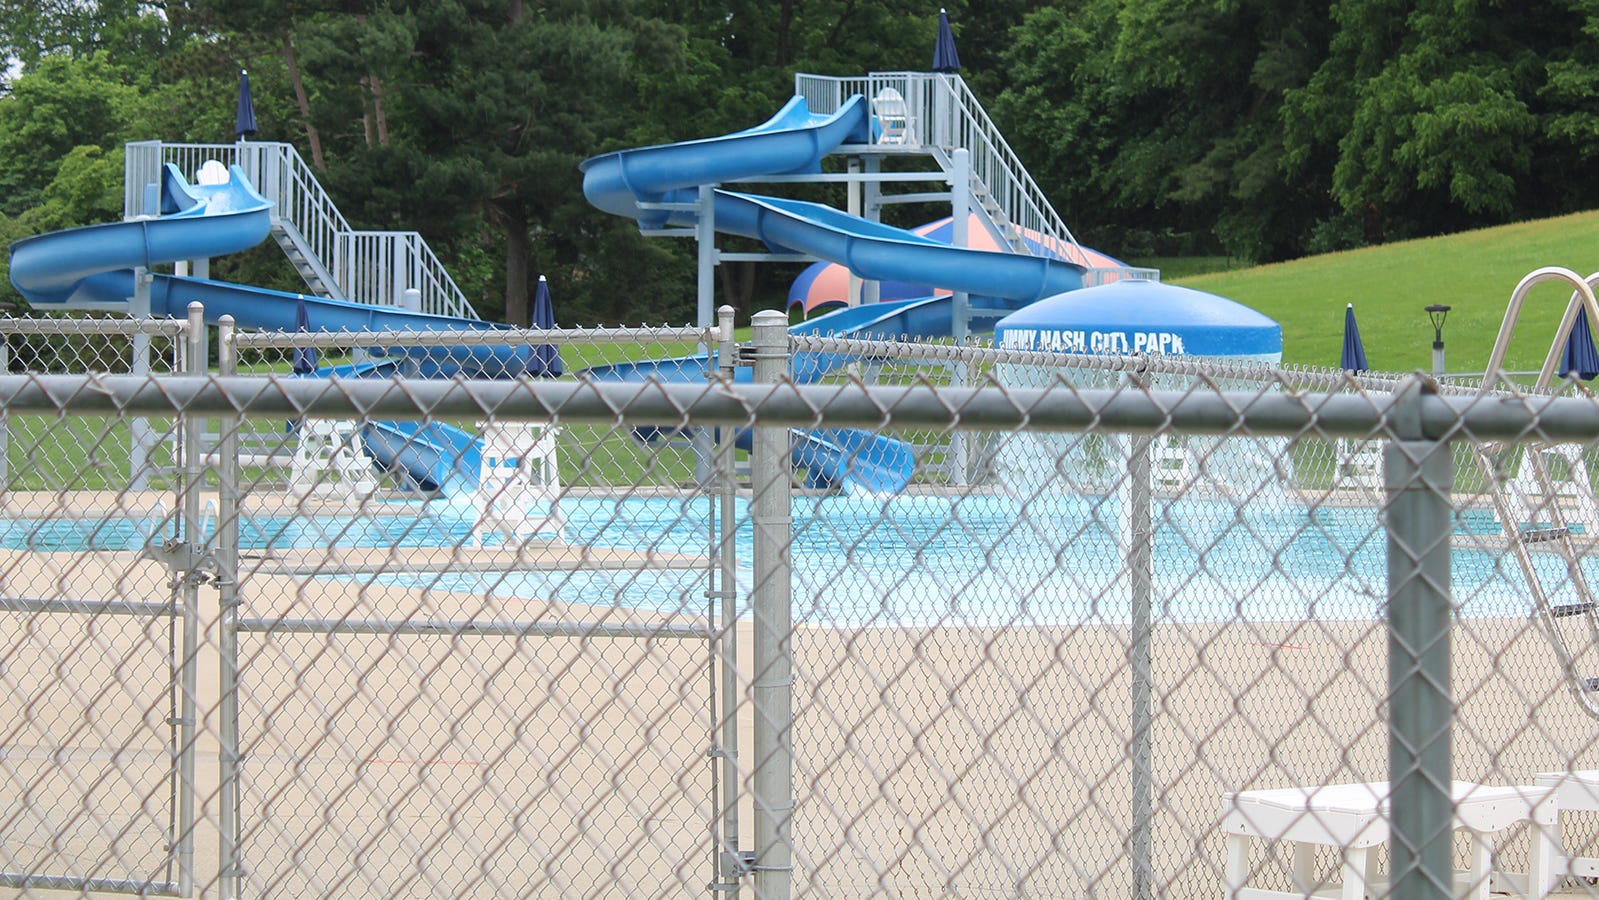 Jimmy Nash Park Pool Expected To Open Saturday For Season